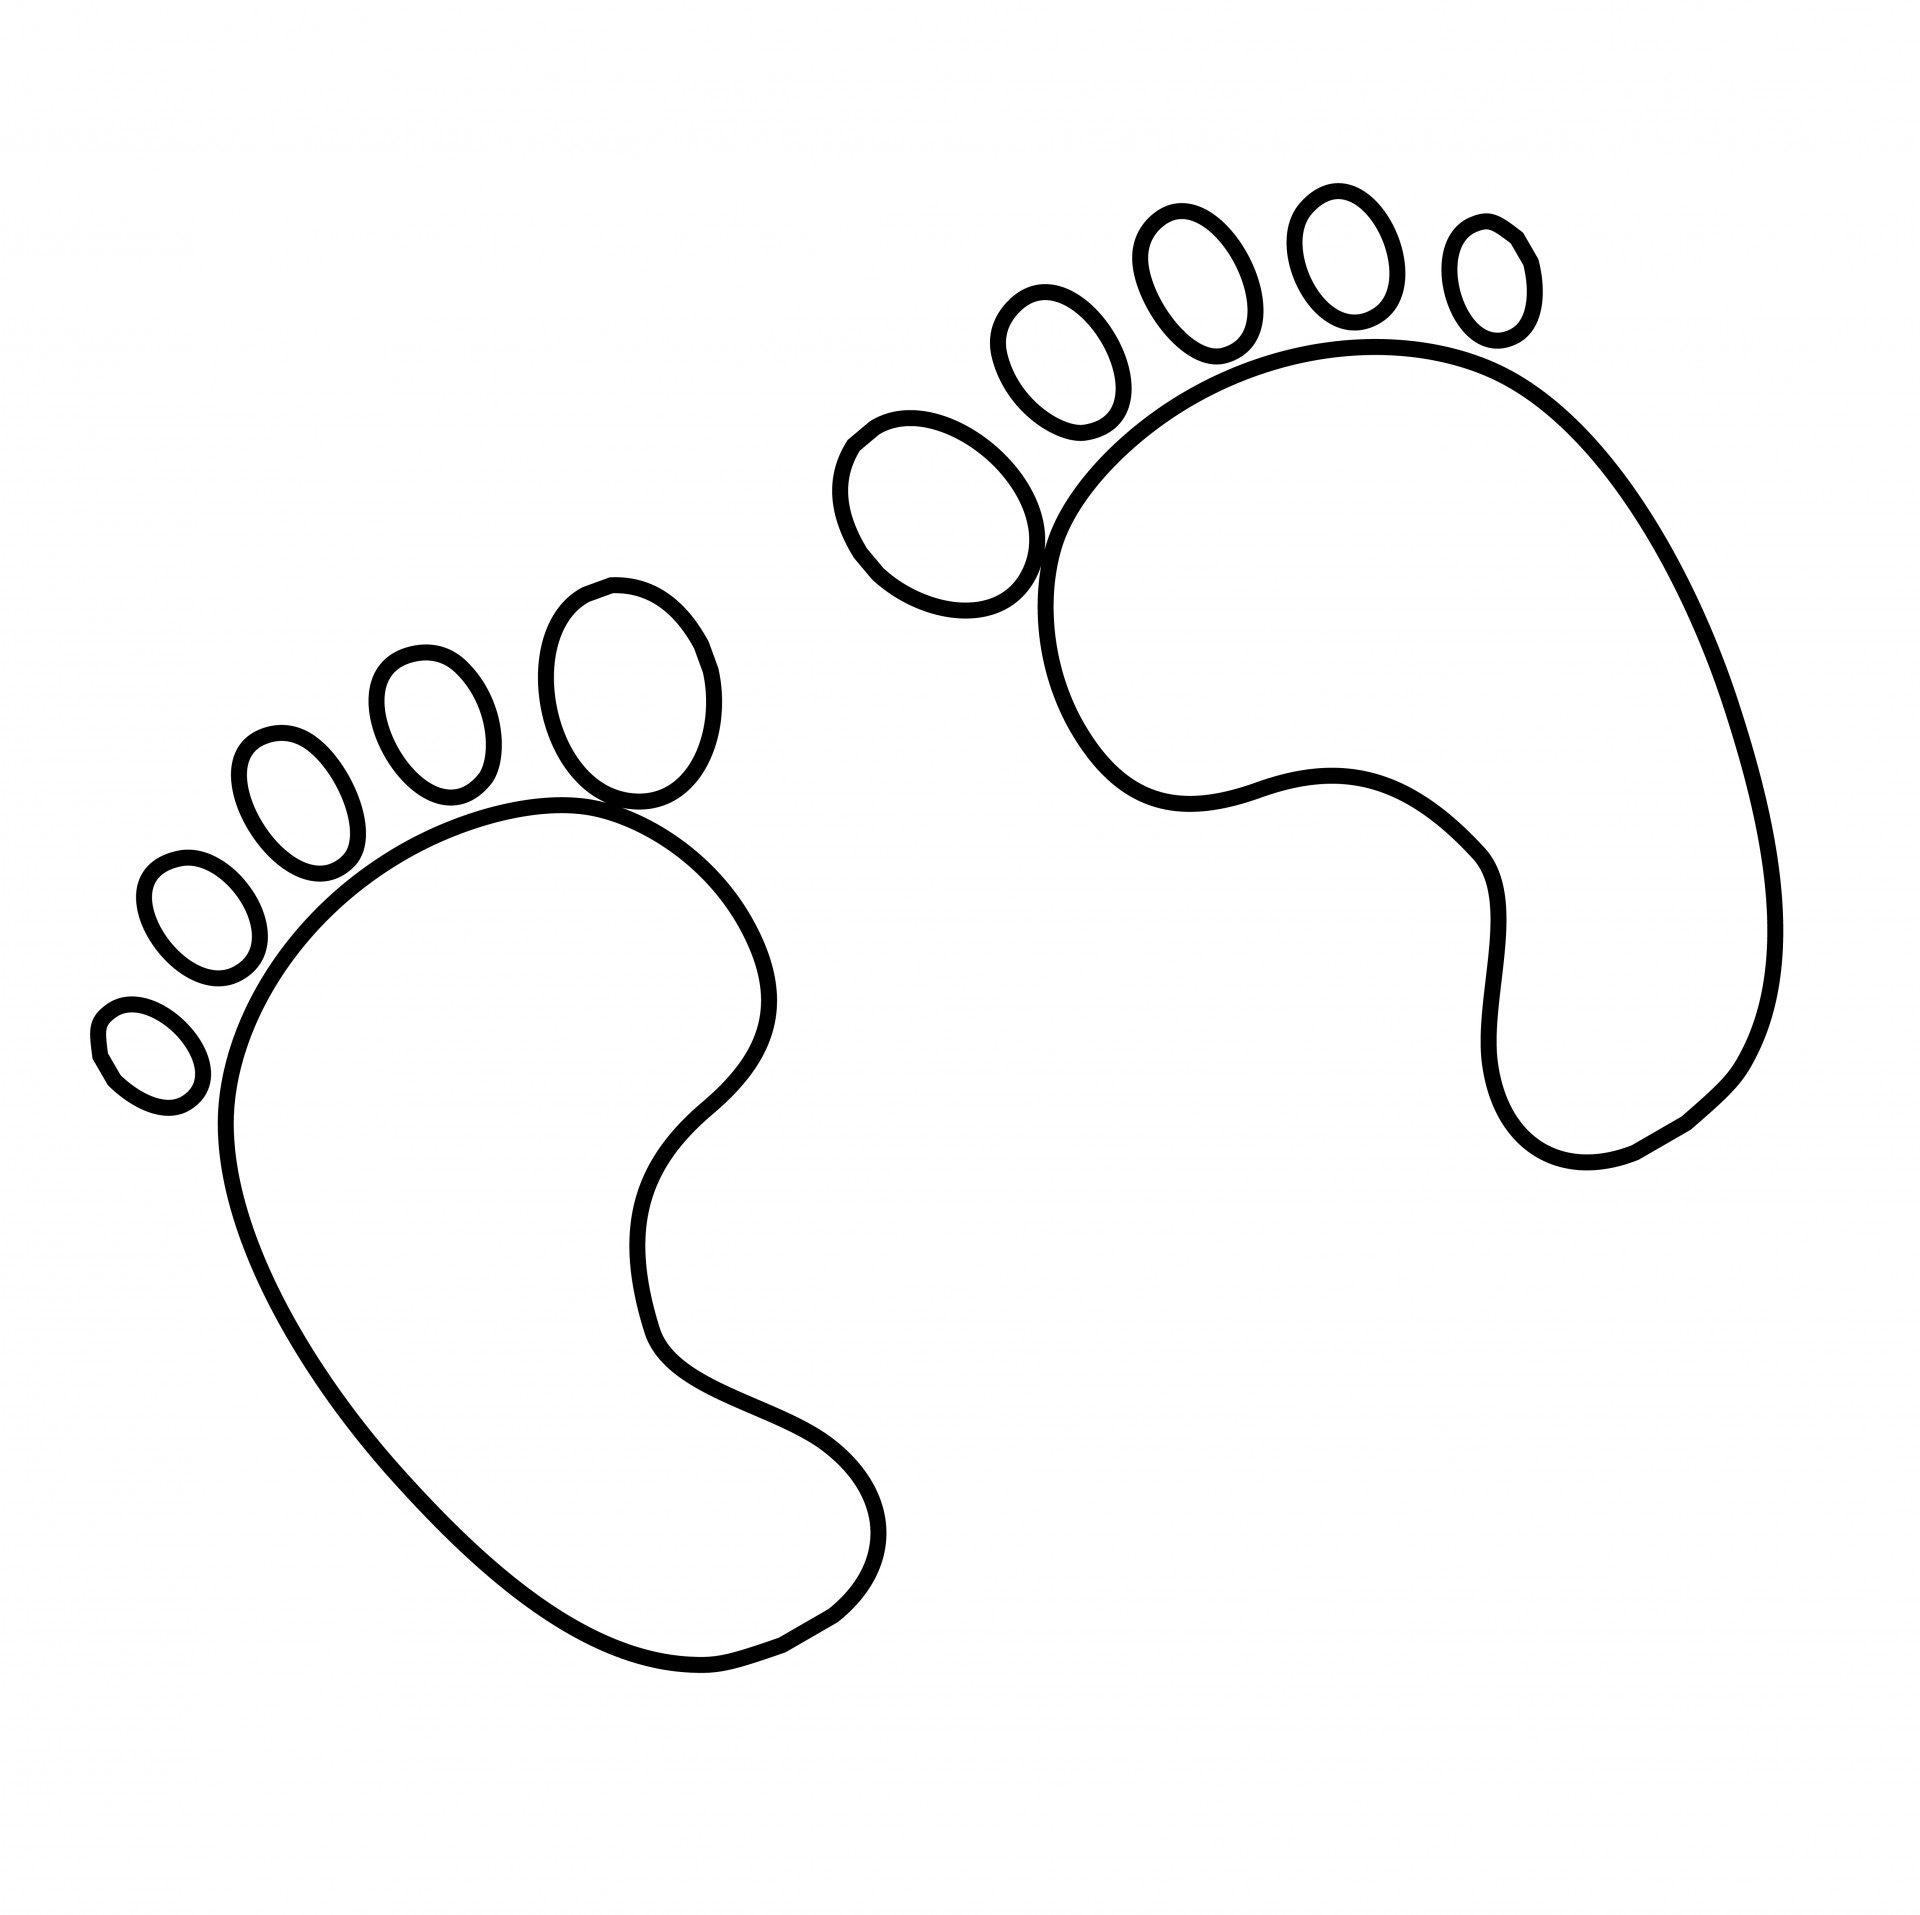 A clipart outline. Footprints free stock photo